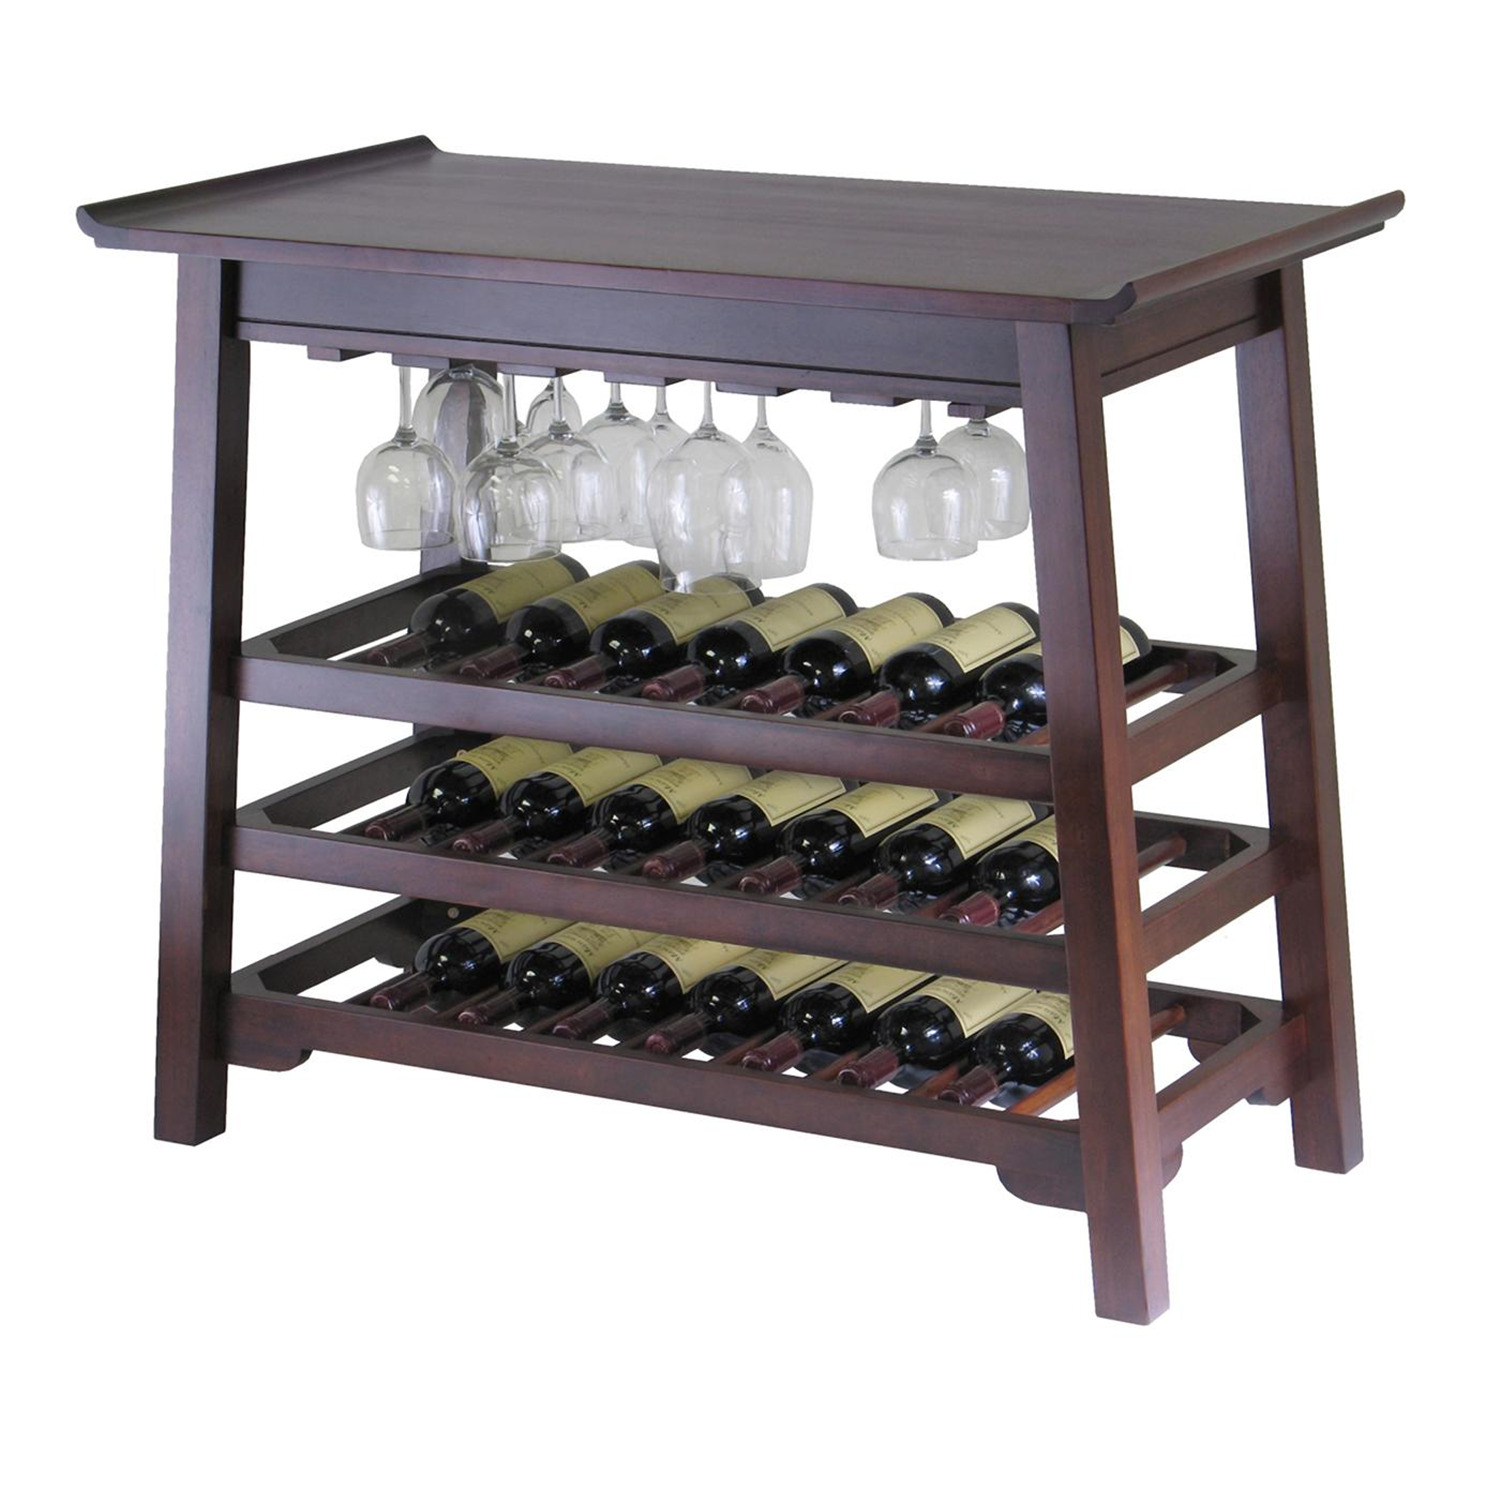 Chinois console wine table with glass rack 94737